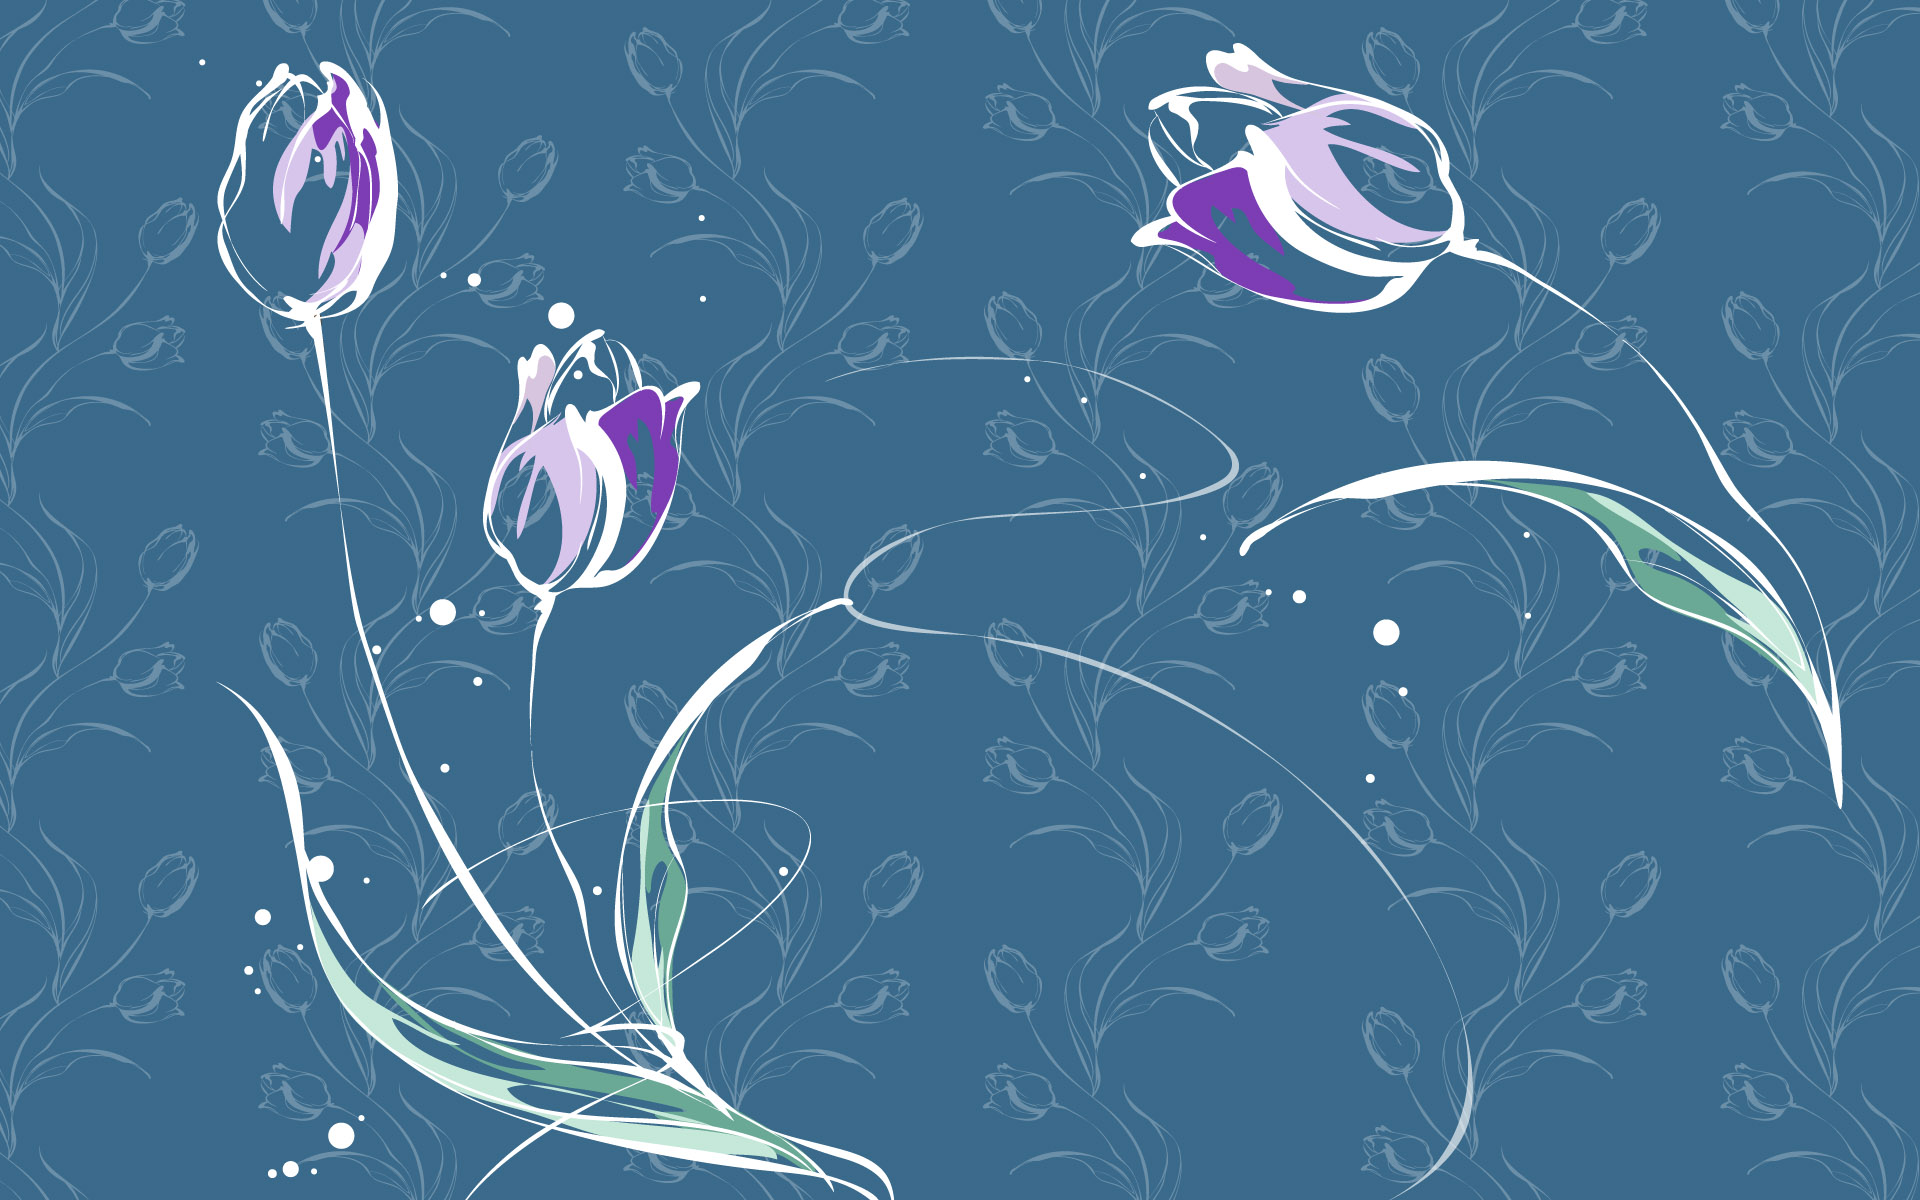 Album Abstract Flowers Design Wallpaper X Uploaded By